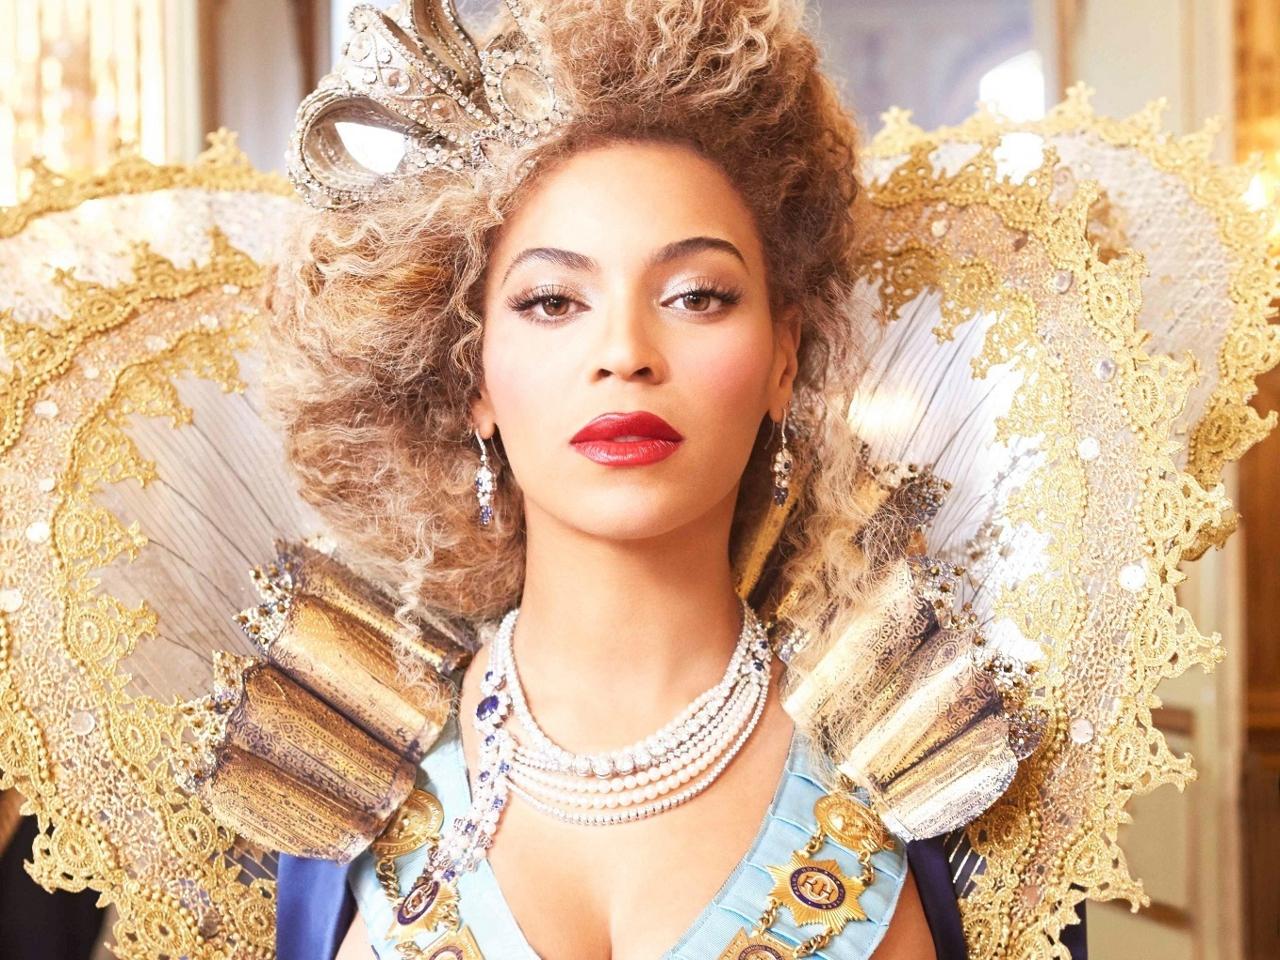 Watch Part 1 & 2 Of Beyoncé's Self Titled Documentary